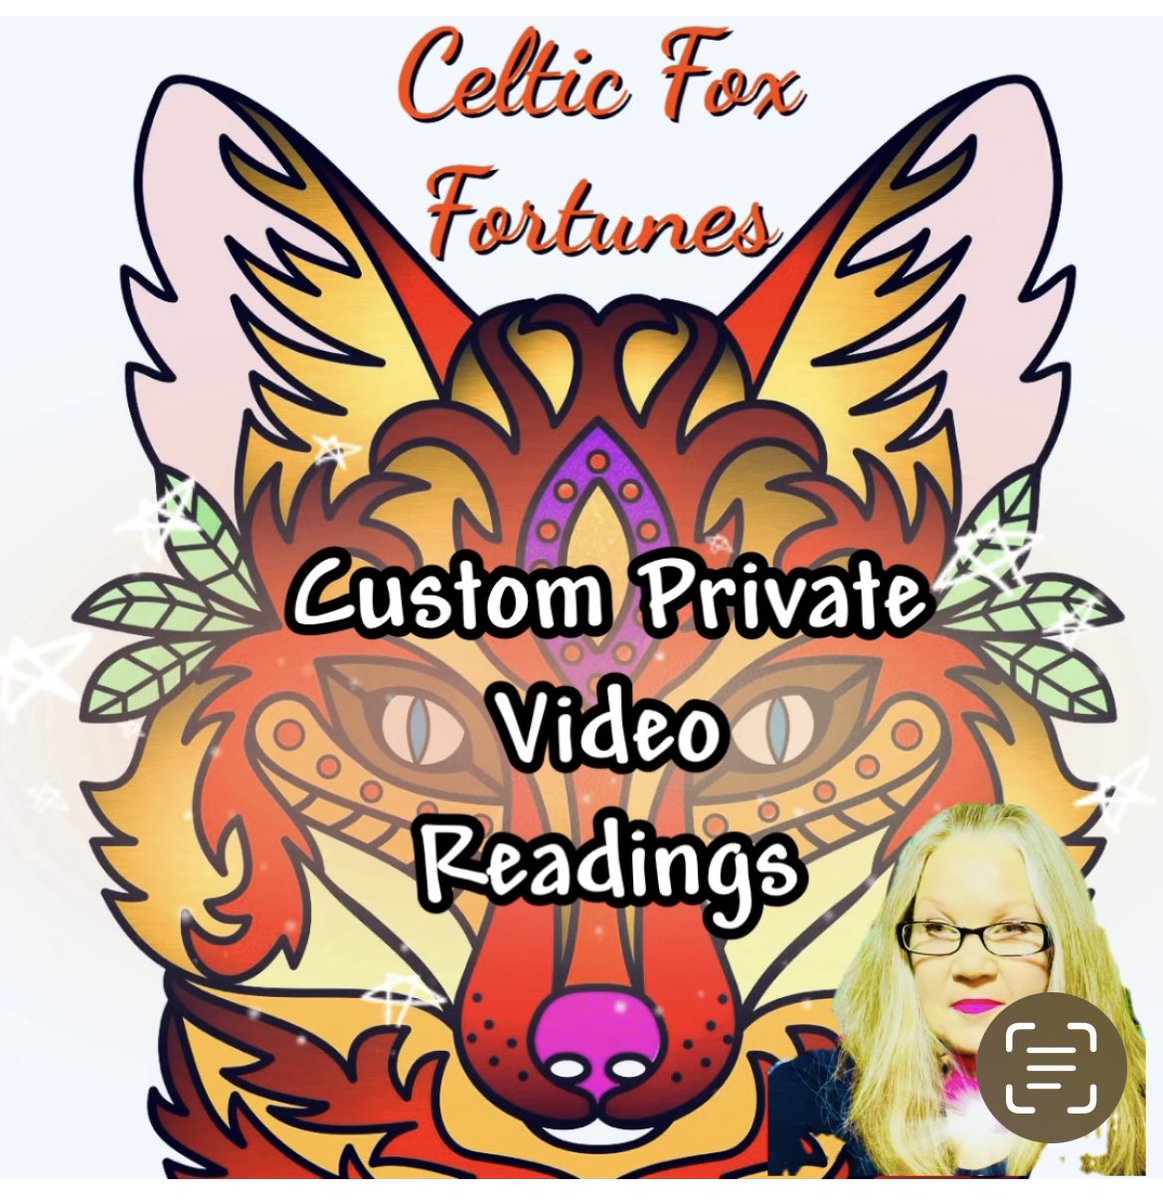 If you have questions about your future or a situation - I’m here to help! 
Book your custom personalized video tarot card reading with me now! 
email me at celticfoxfortunes@gmail.com or send a DM for more info!

#tarotreader
#tarot
#tarotcards
#tarotreadings